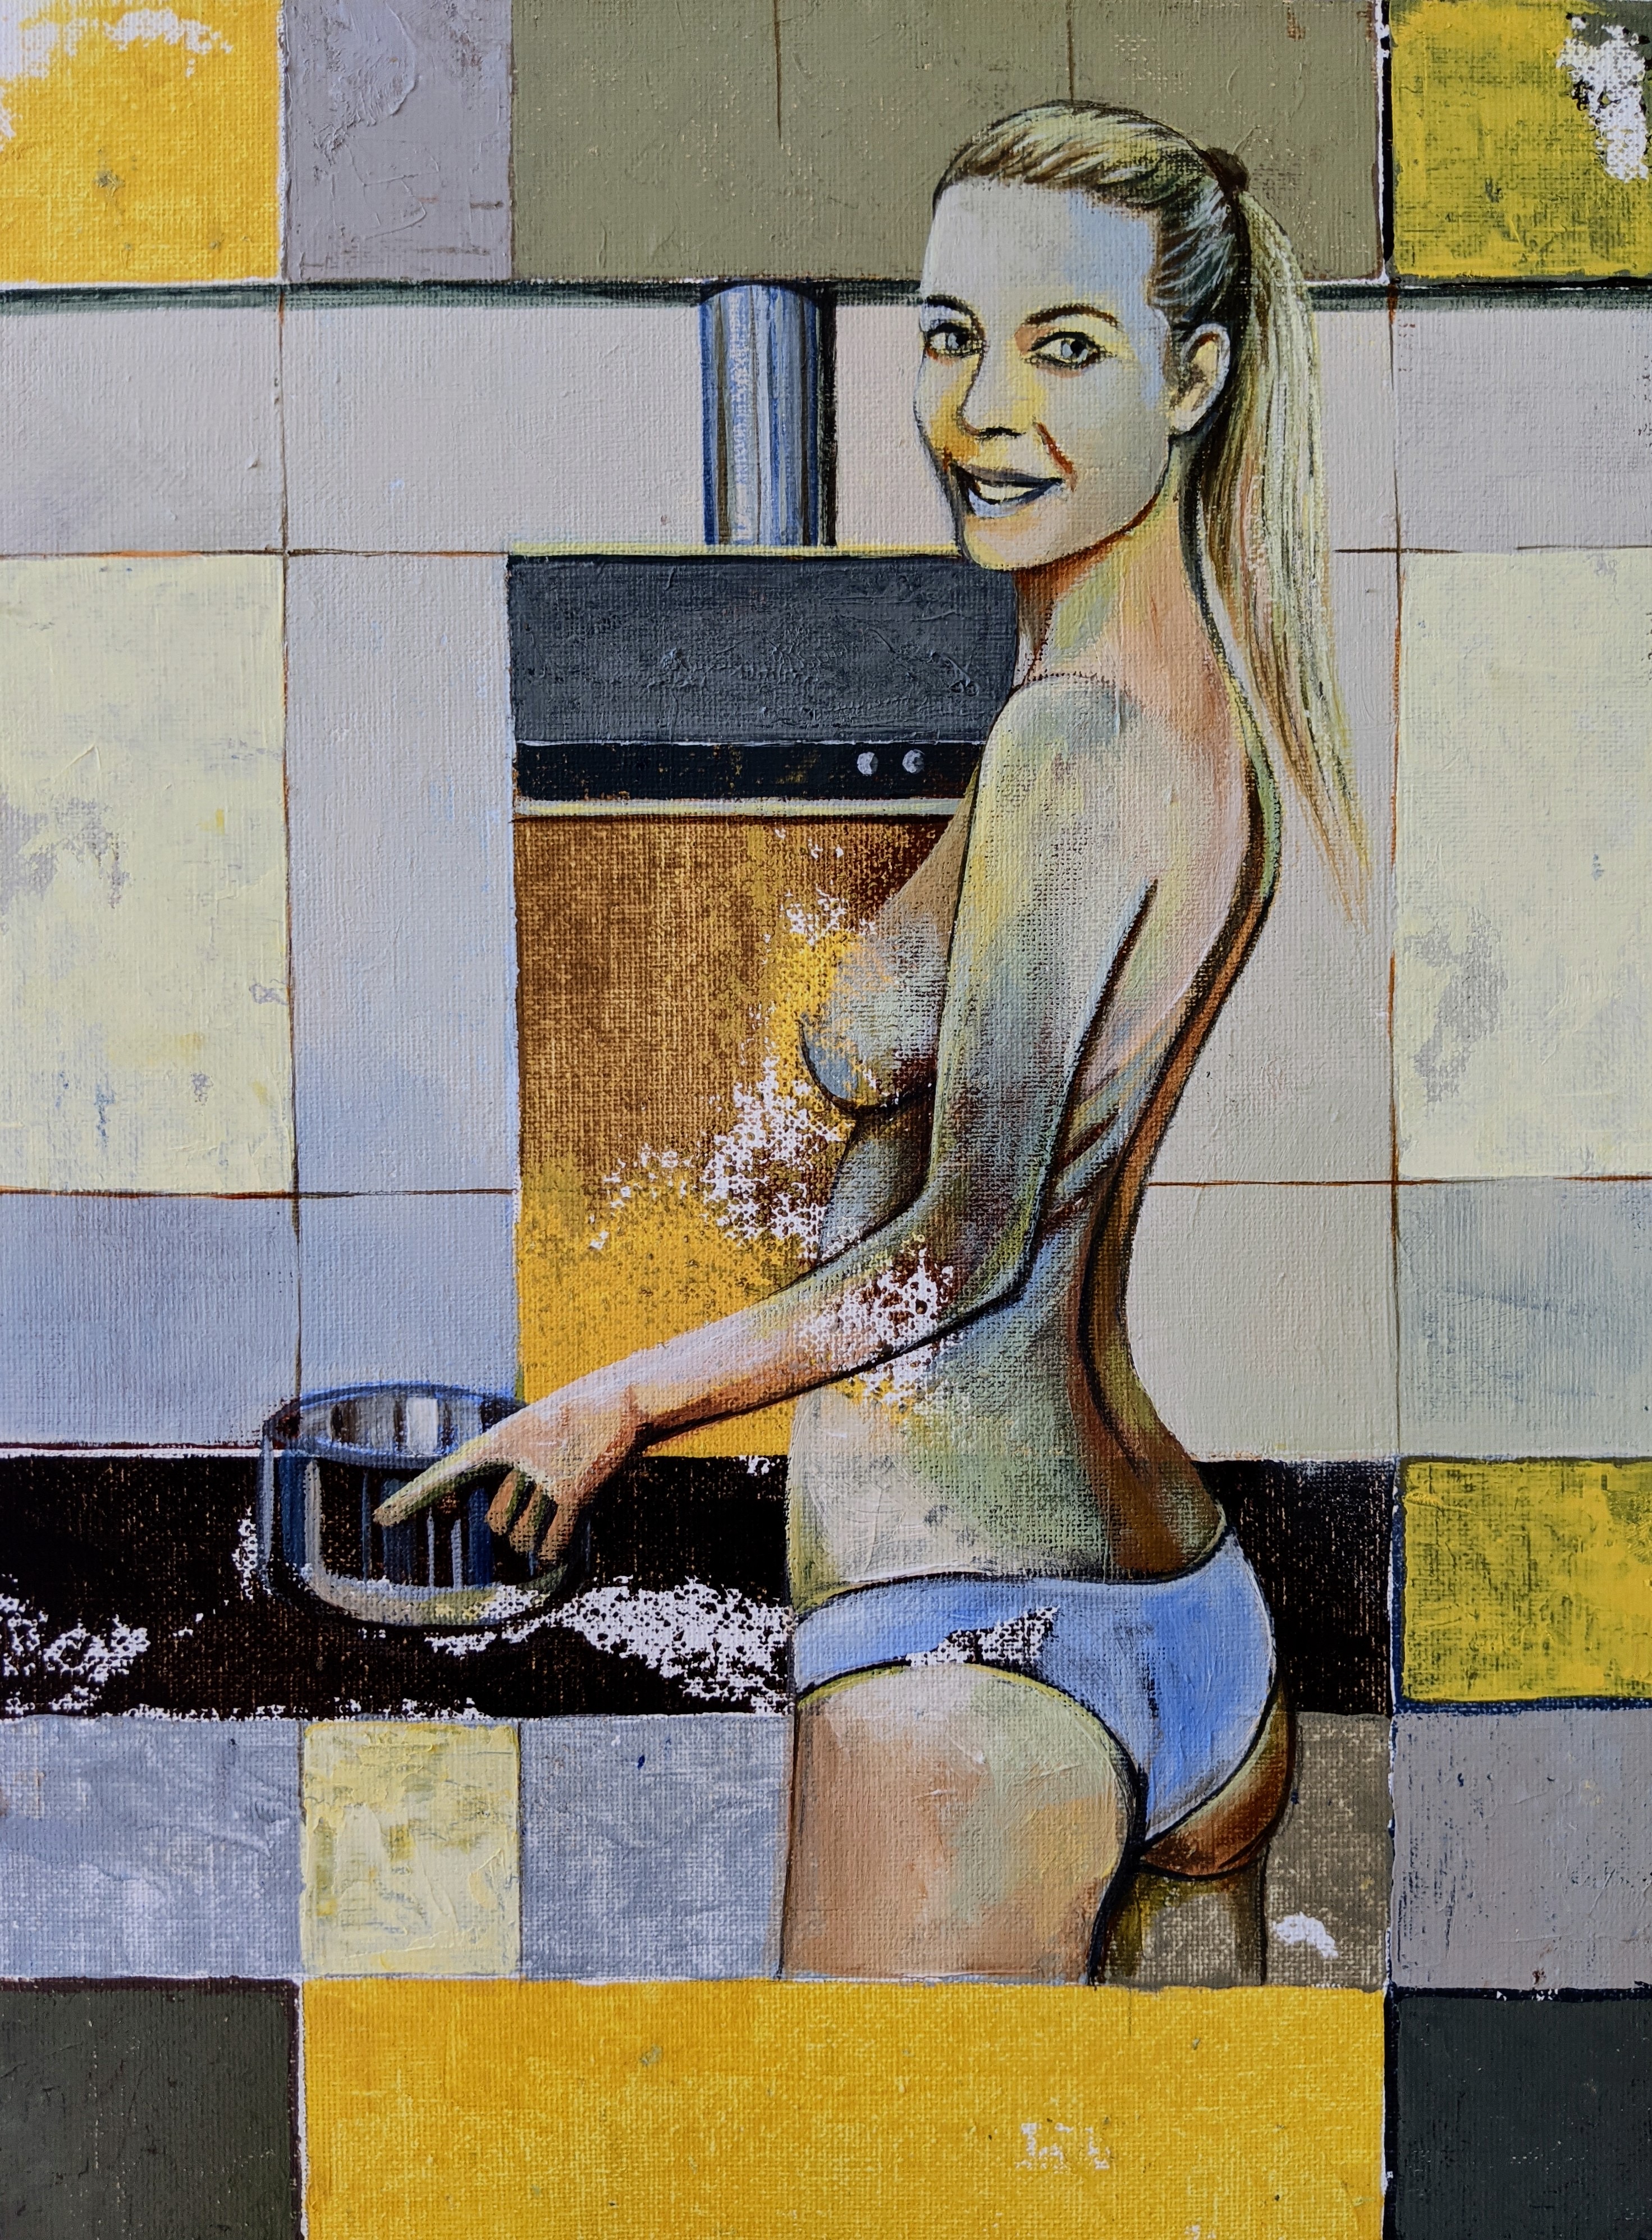 Come to my kitchen naked 3
Acrylics on canvas 
30*40